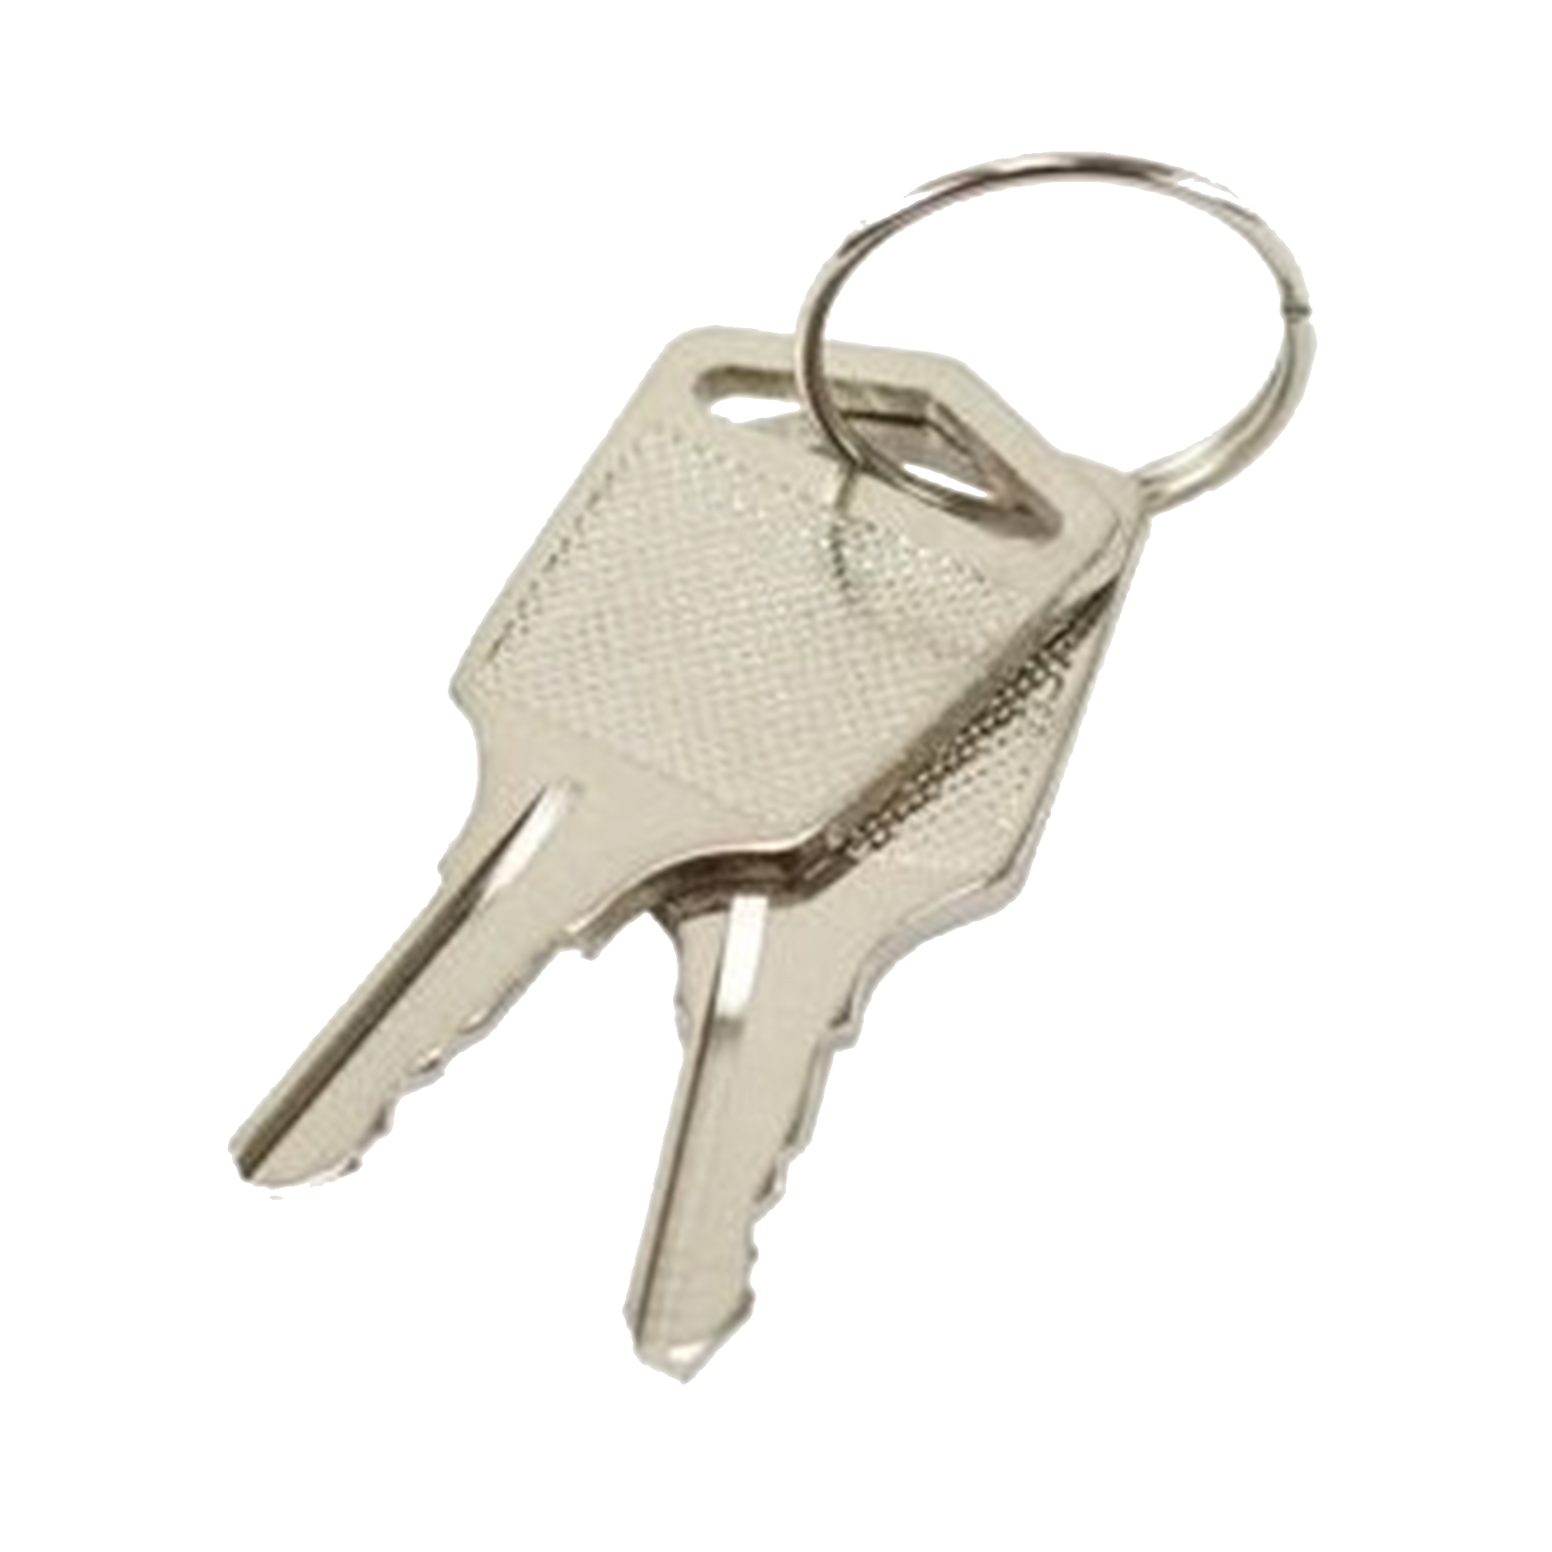 OWC Replacement Keys - Discontinued